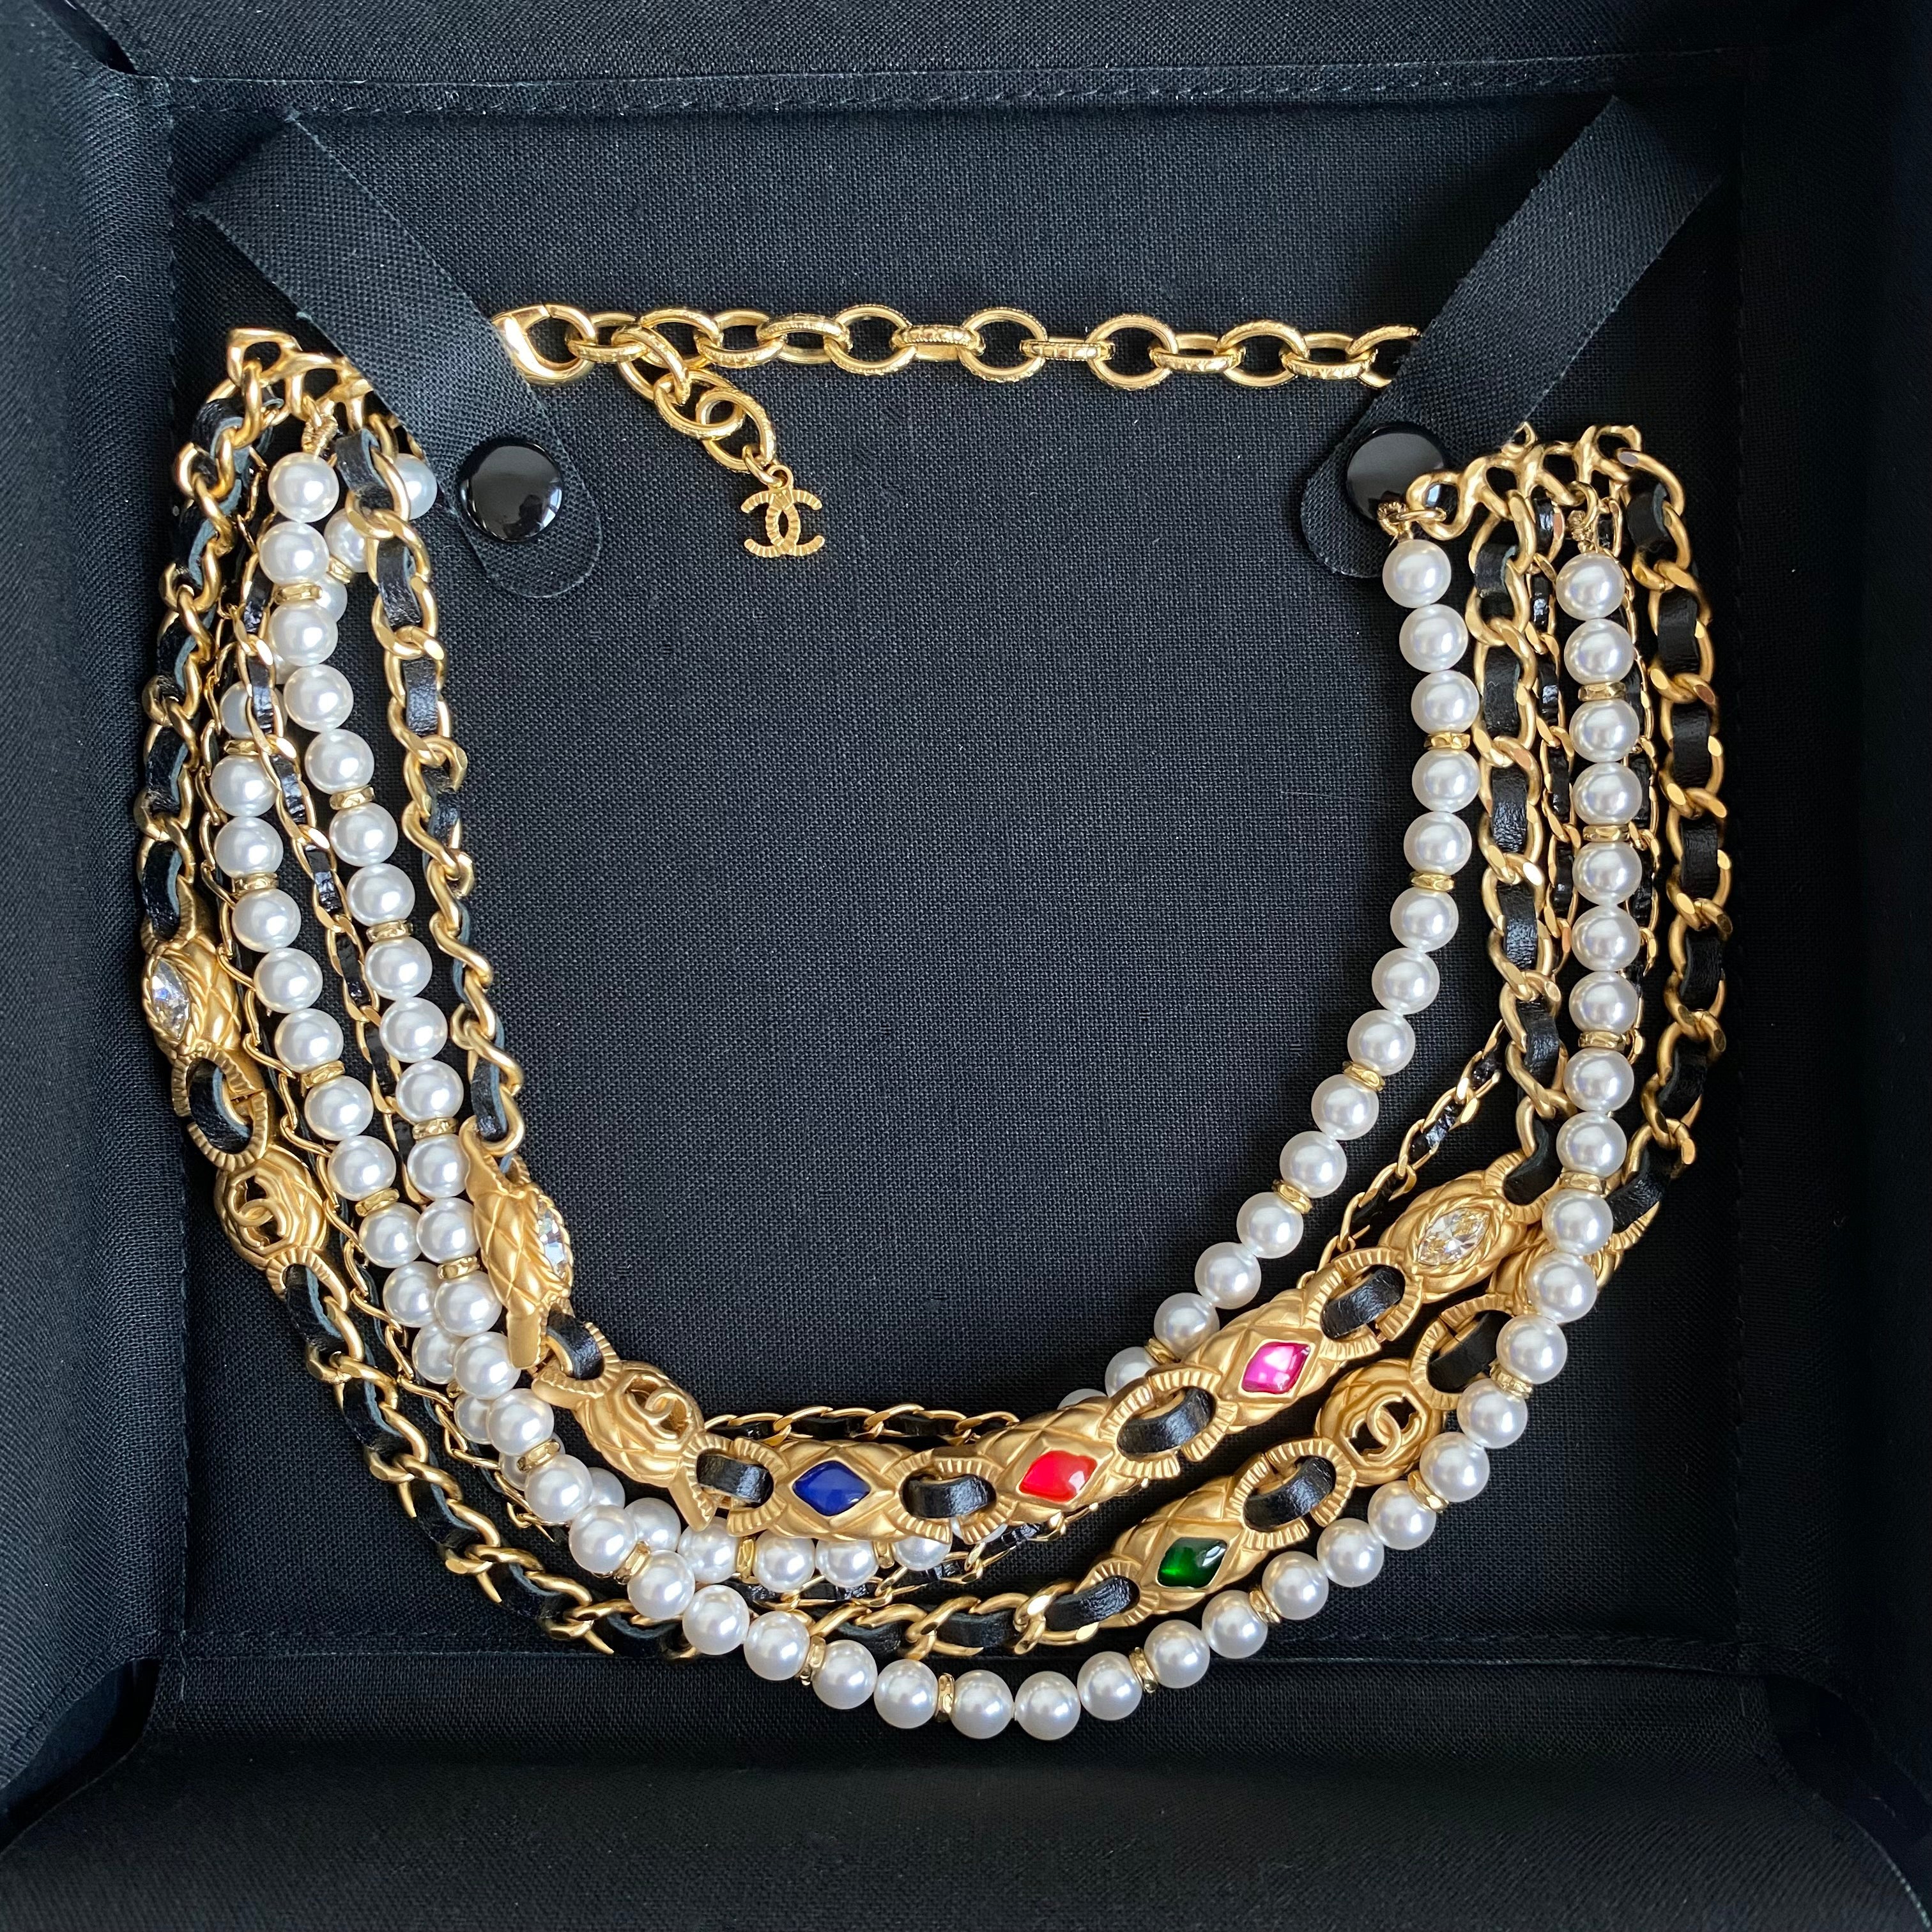 CHANEL 20C Jewel Tone Gripoix Pearl Gold Leather Chain Multi-Strand Choker  Necklace